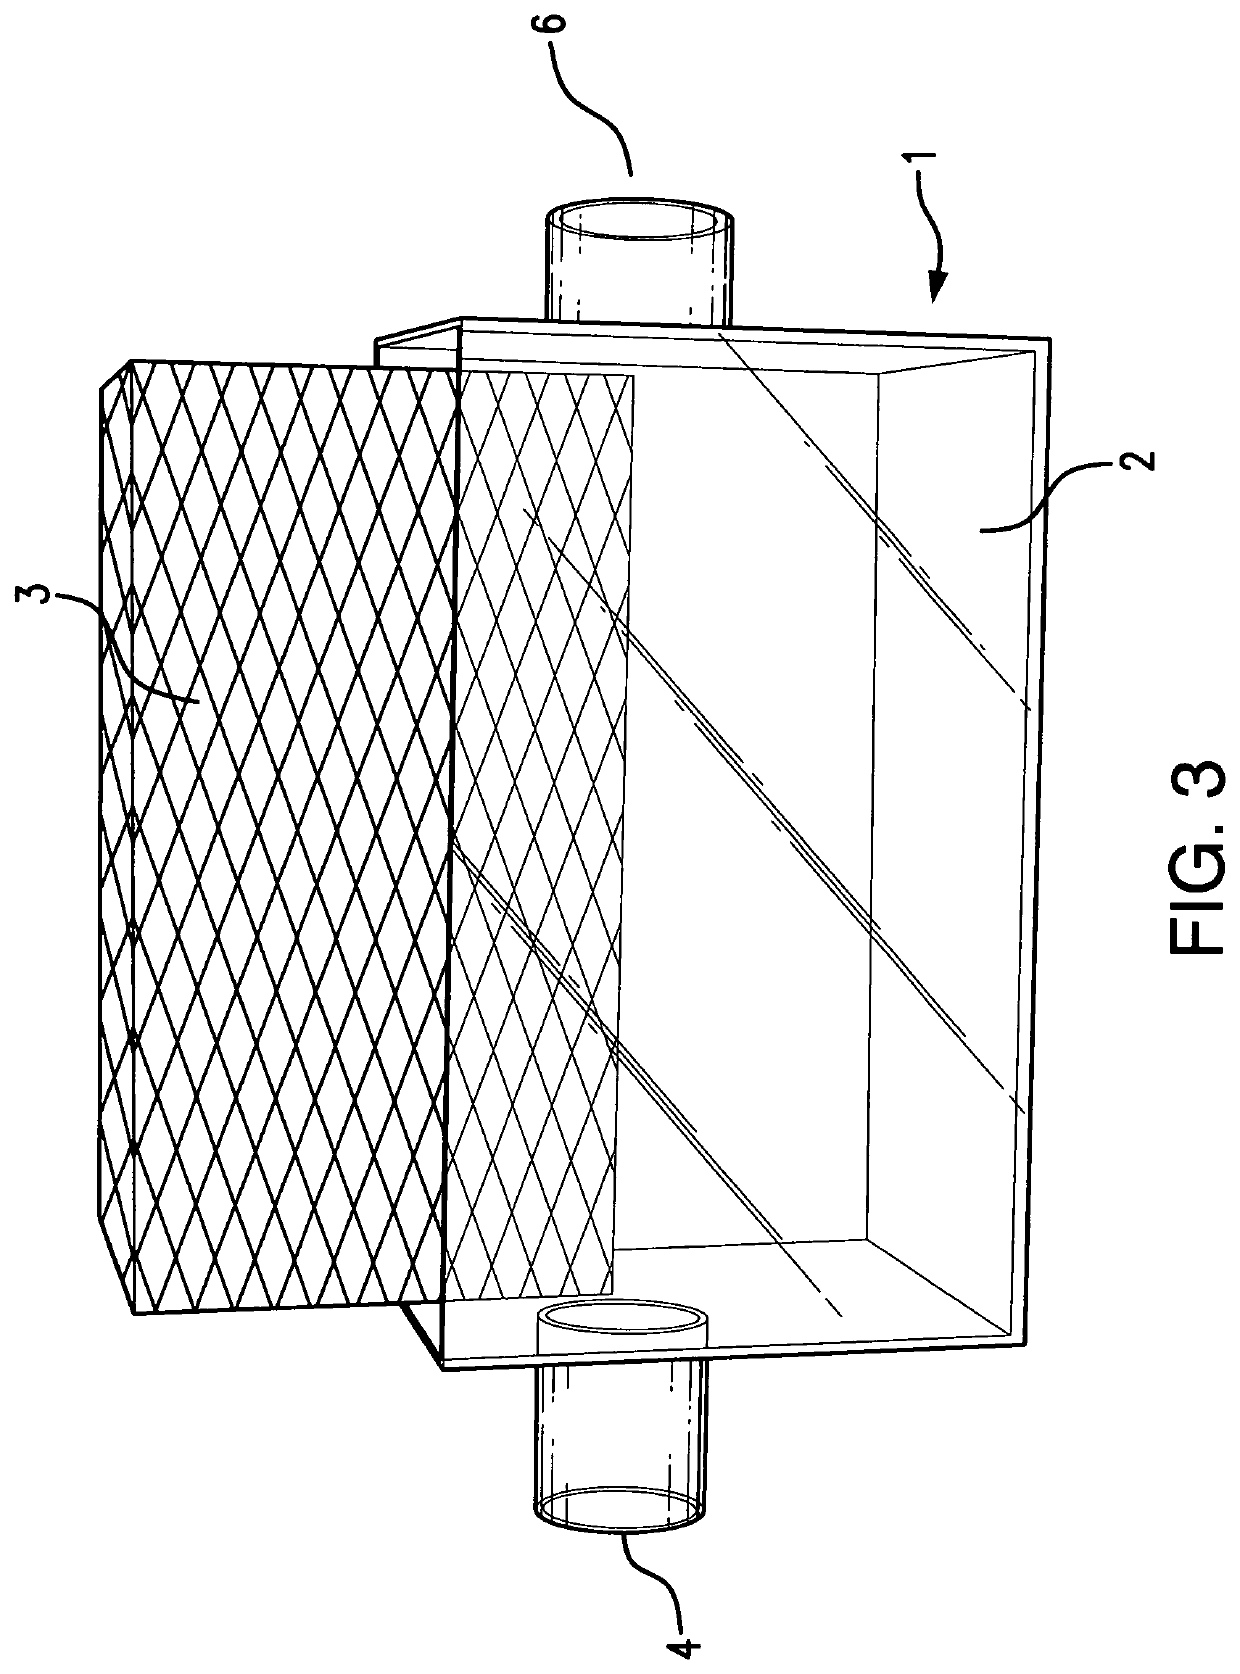 Humidifier for continuous positive airway pressure device